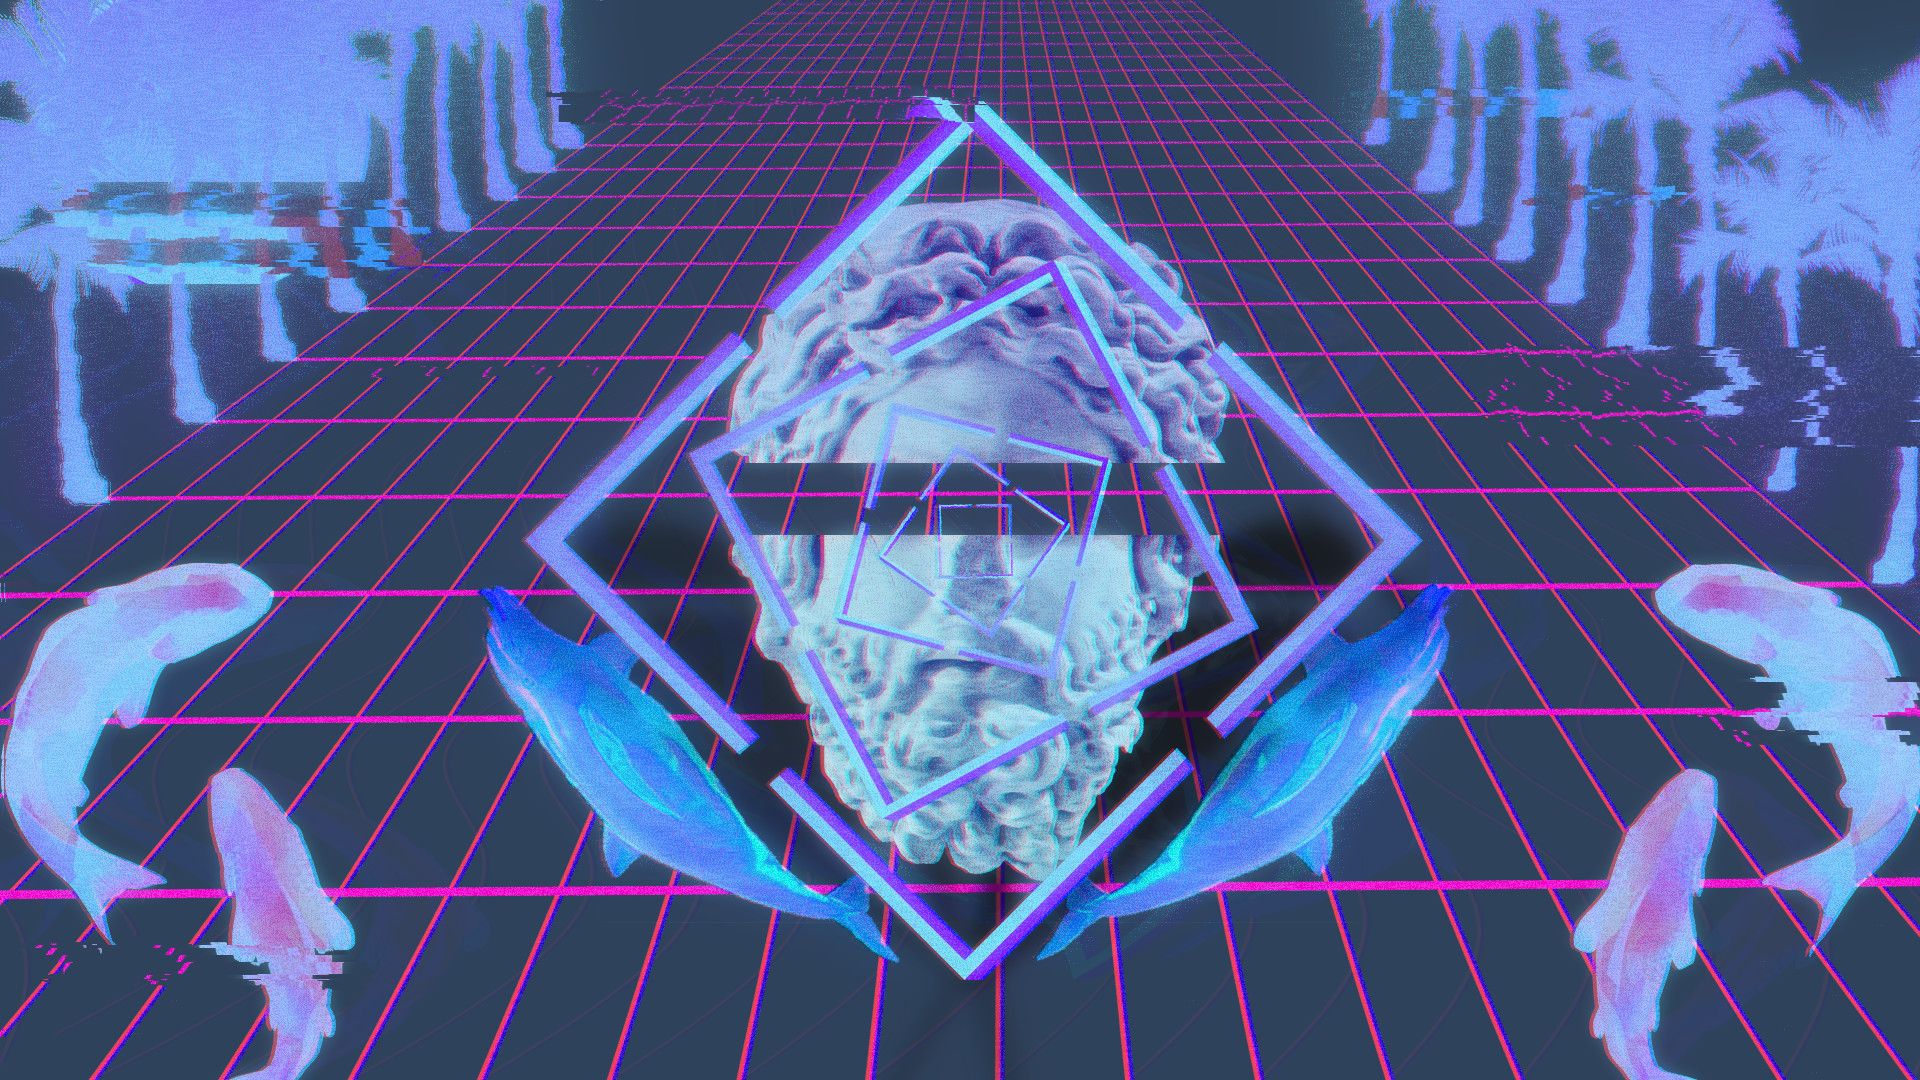 25 Greatest 4k wallpaper vaporwave You Can Get It free - Aesthetic Arena